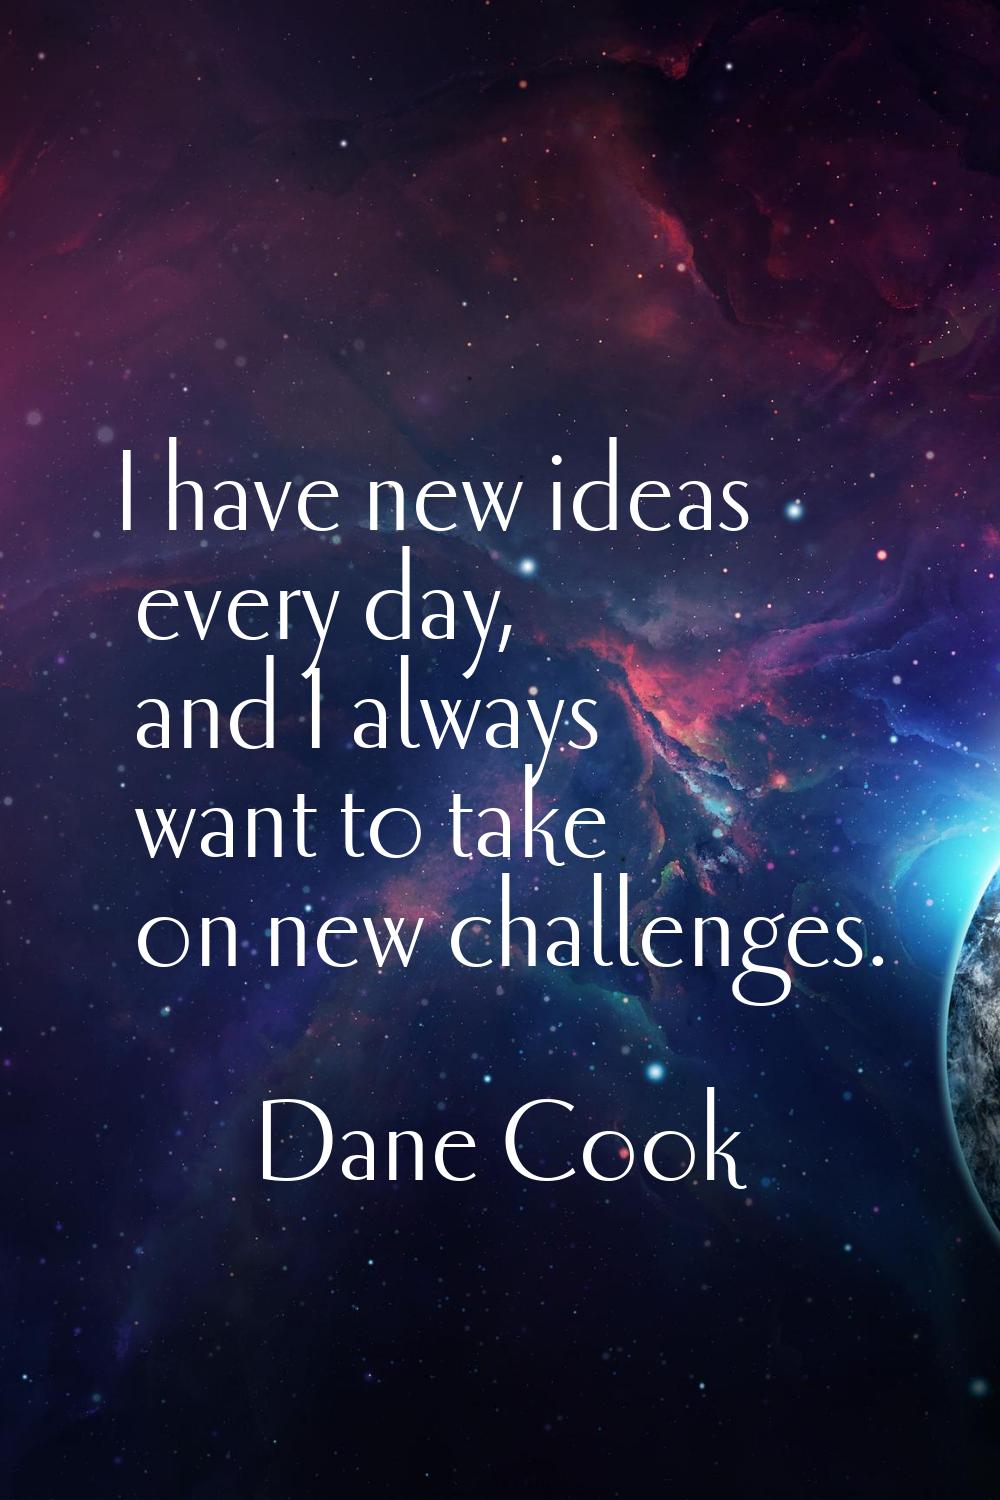 I have new ideas every day, and I always want to take on new challenges.